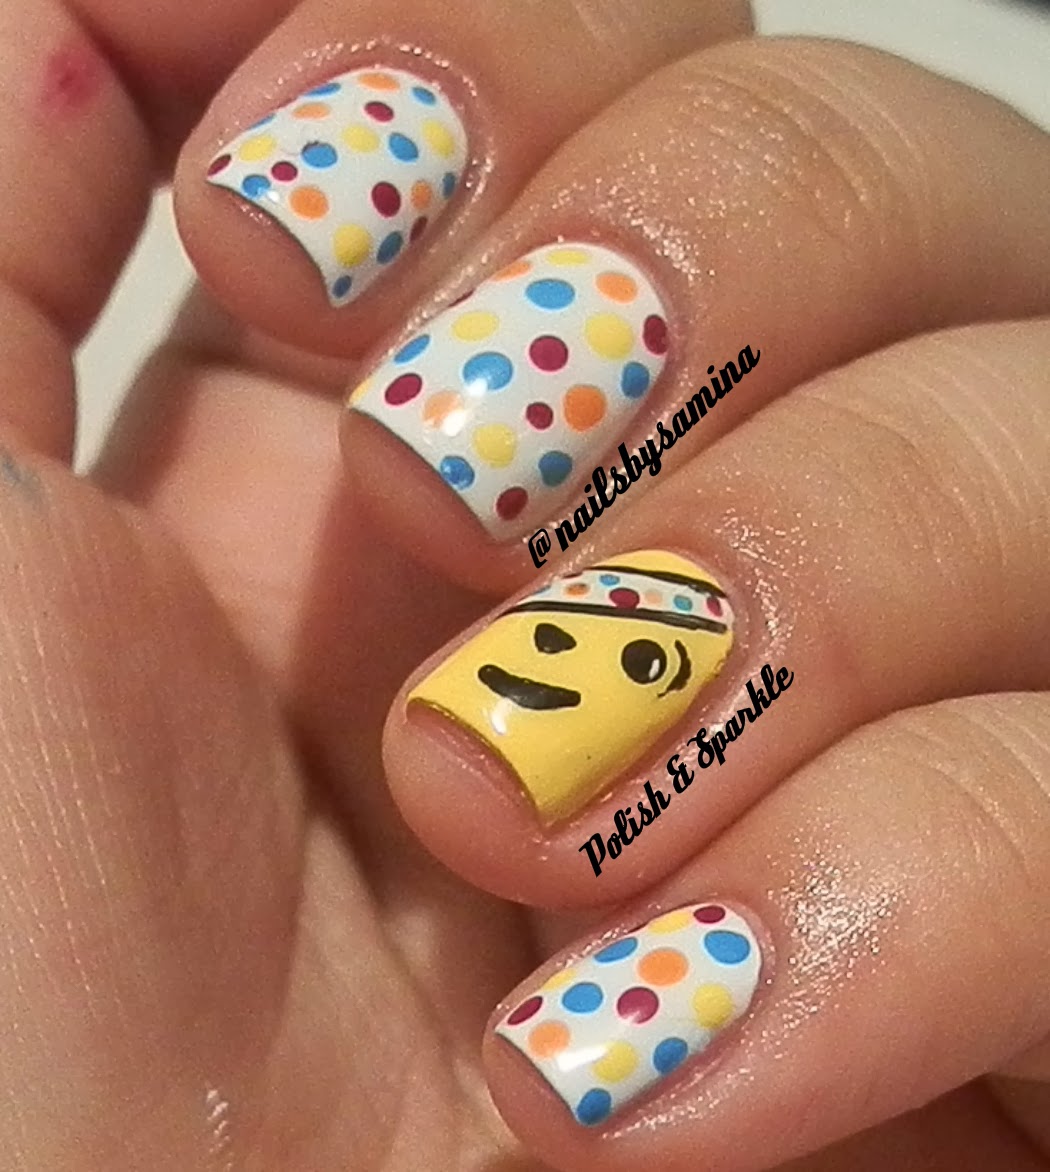 Polish & Sparkle: Children In Need - Pudsey Nails